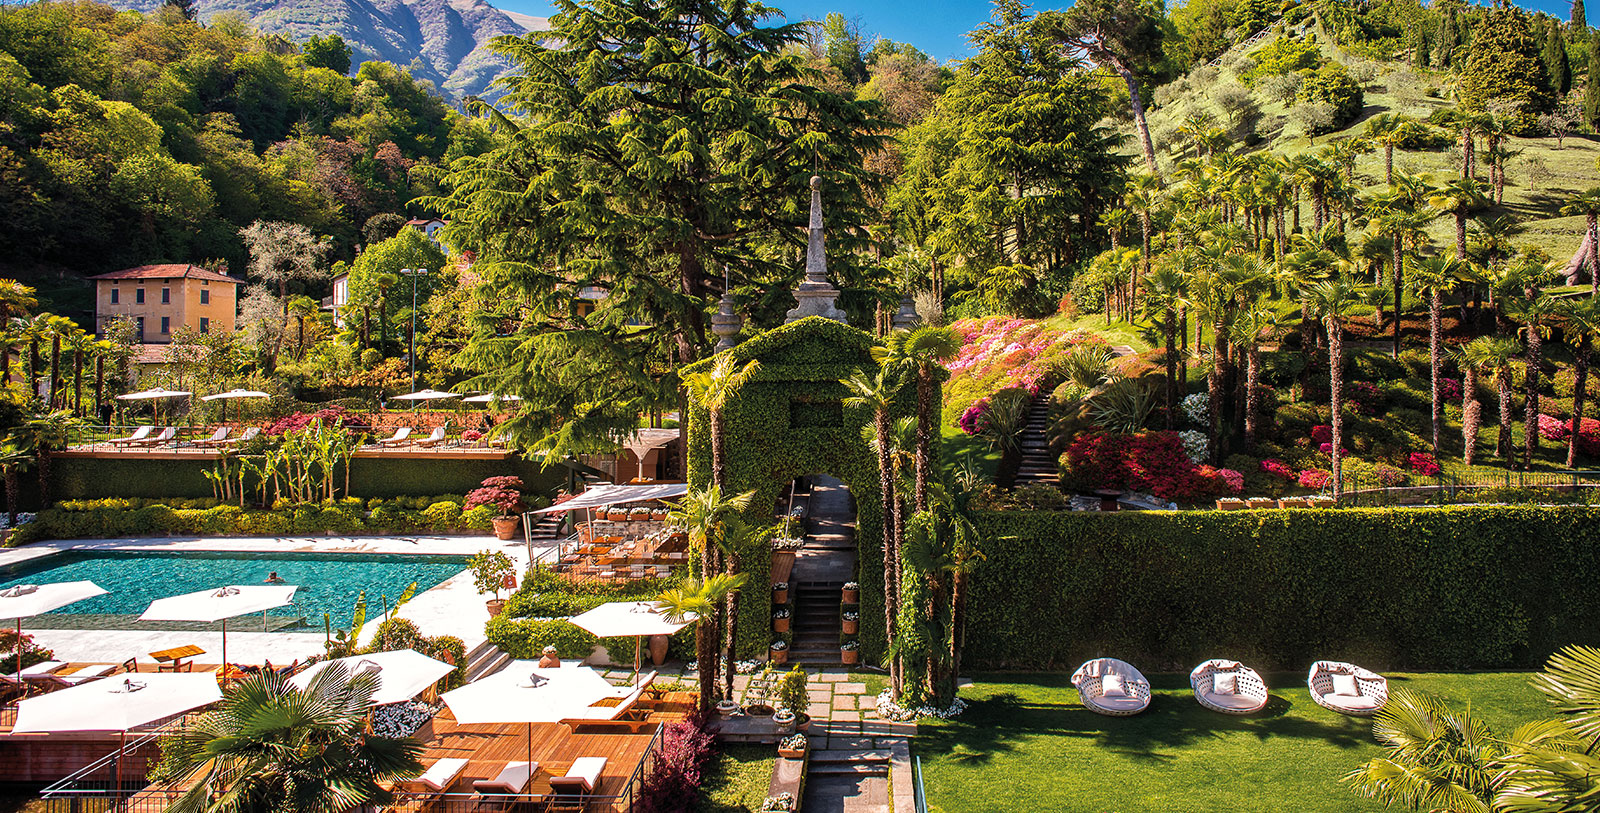 The 2022 Top 25 Historic Hotels Worldwide Most Magnificent Gardens List Announced